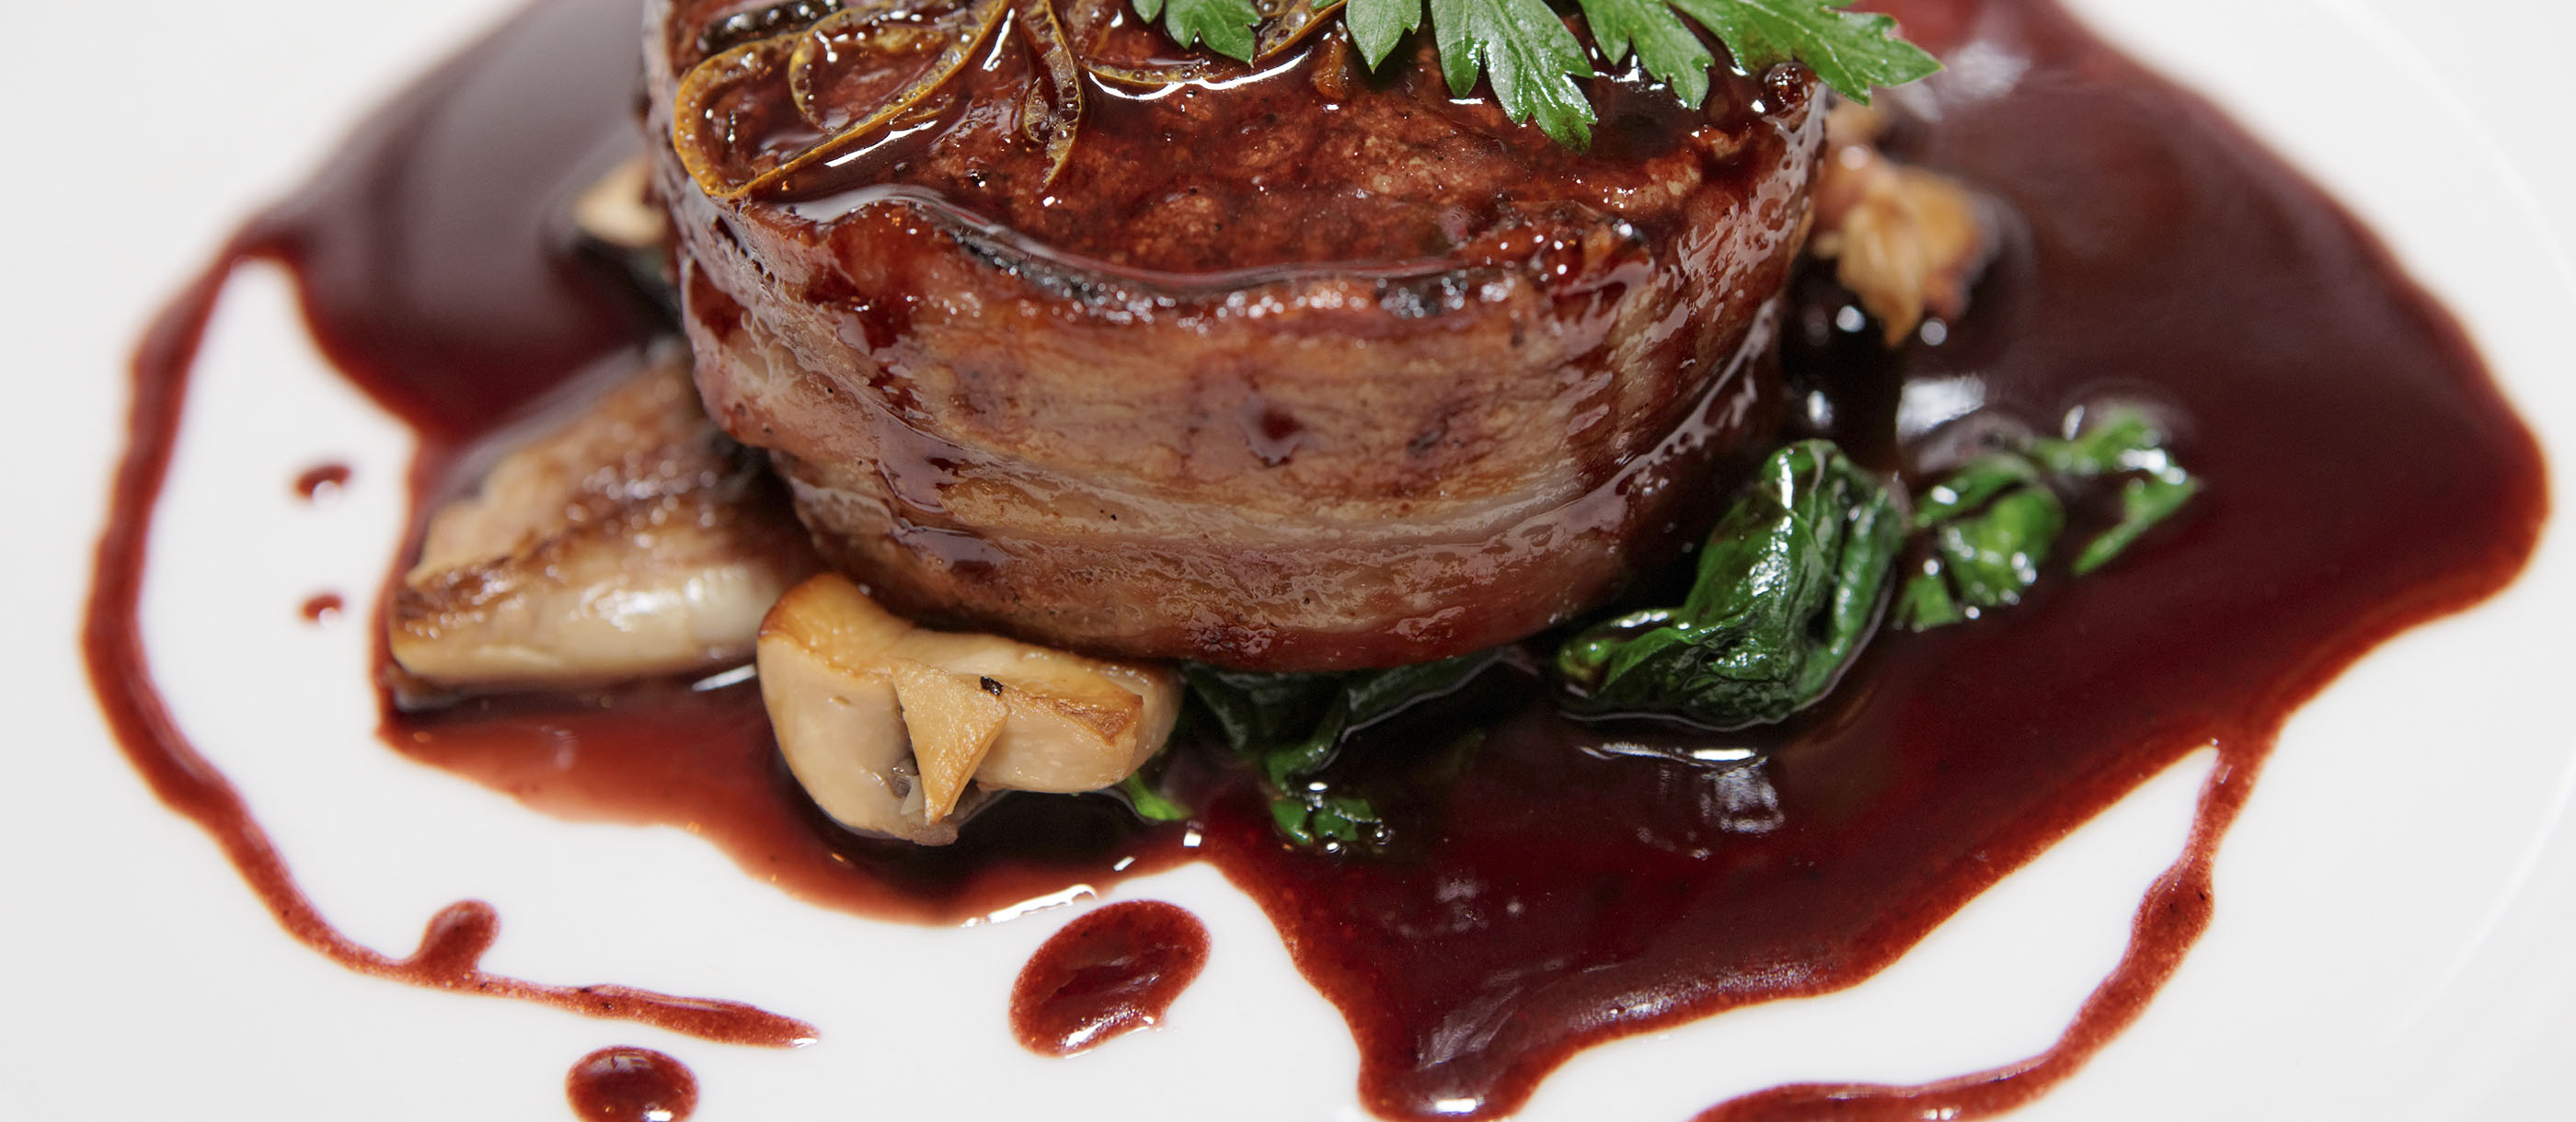 Demi-glace | Traditional Sauce From France